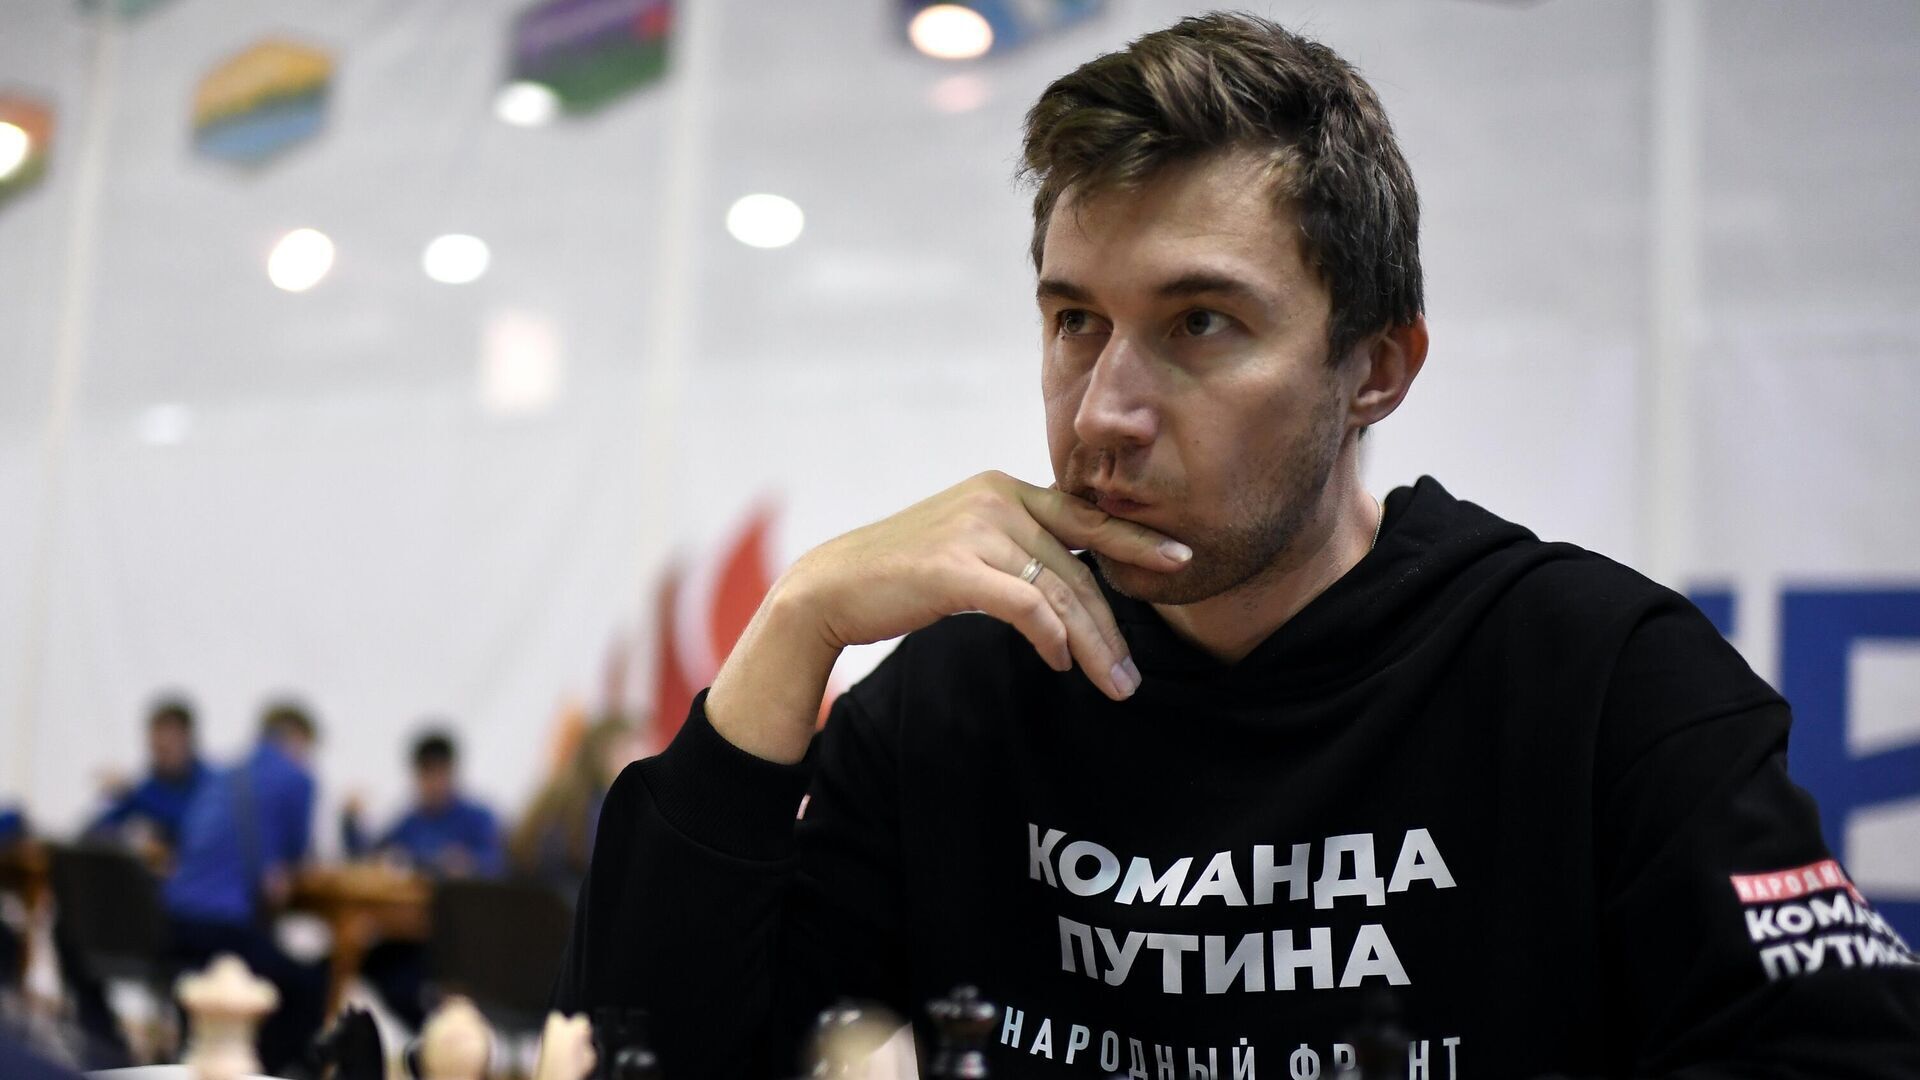 Notorious Russian Chess Federation thrown out of world sport as Ukrainians win the case